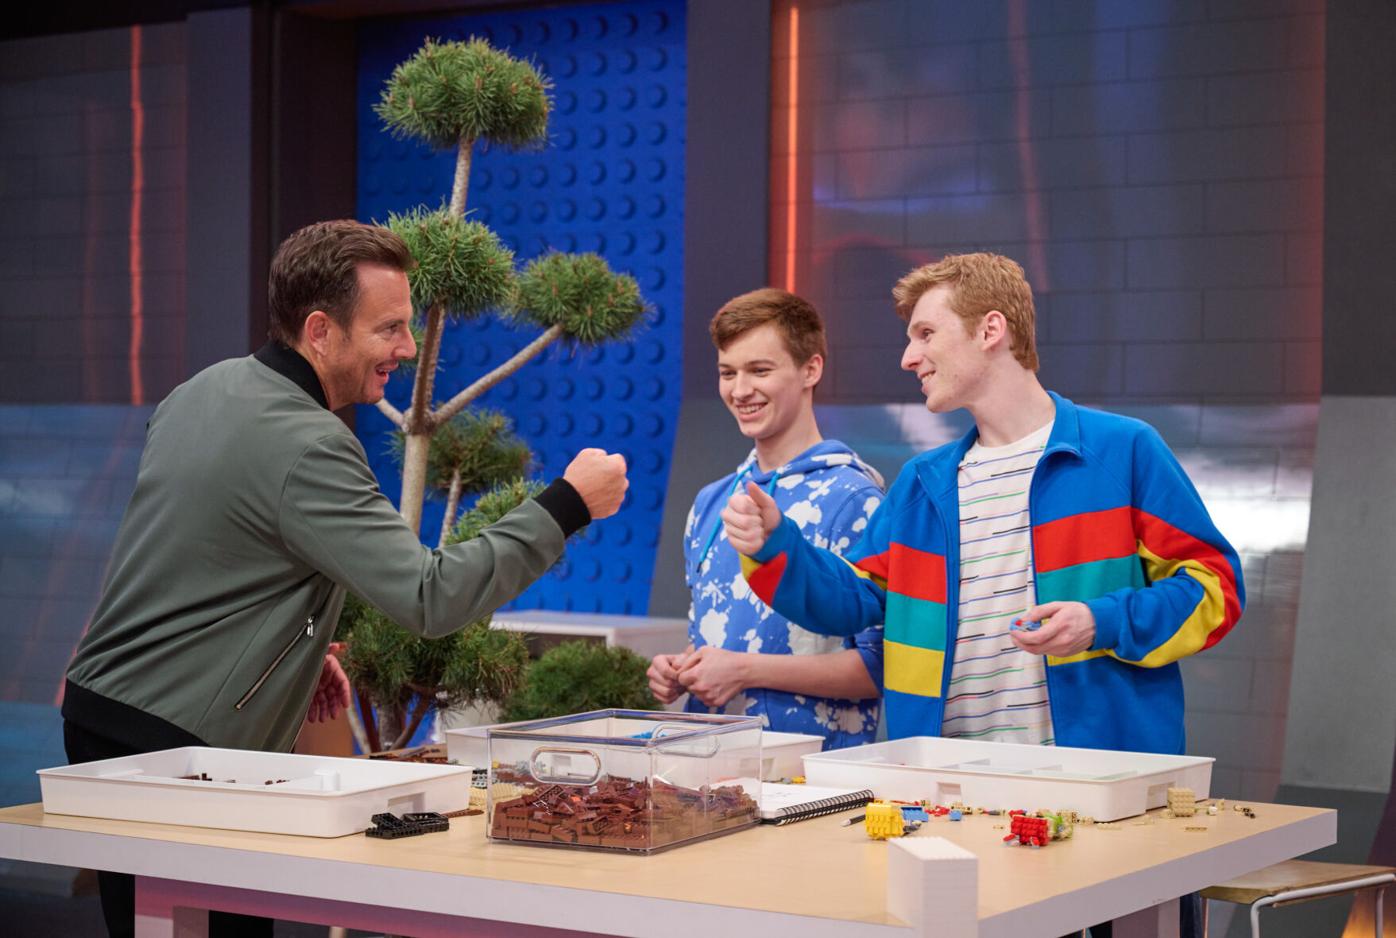 19-year-old Lancaster on TV's 'Lego Masters' tonight; here's how to watch and where stands | Entertainment | lancasteronline.com